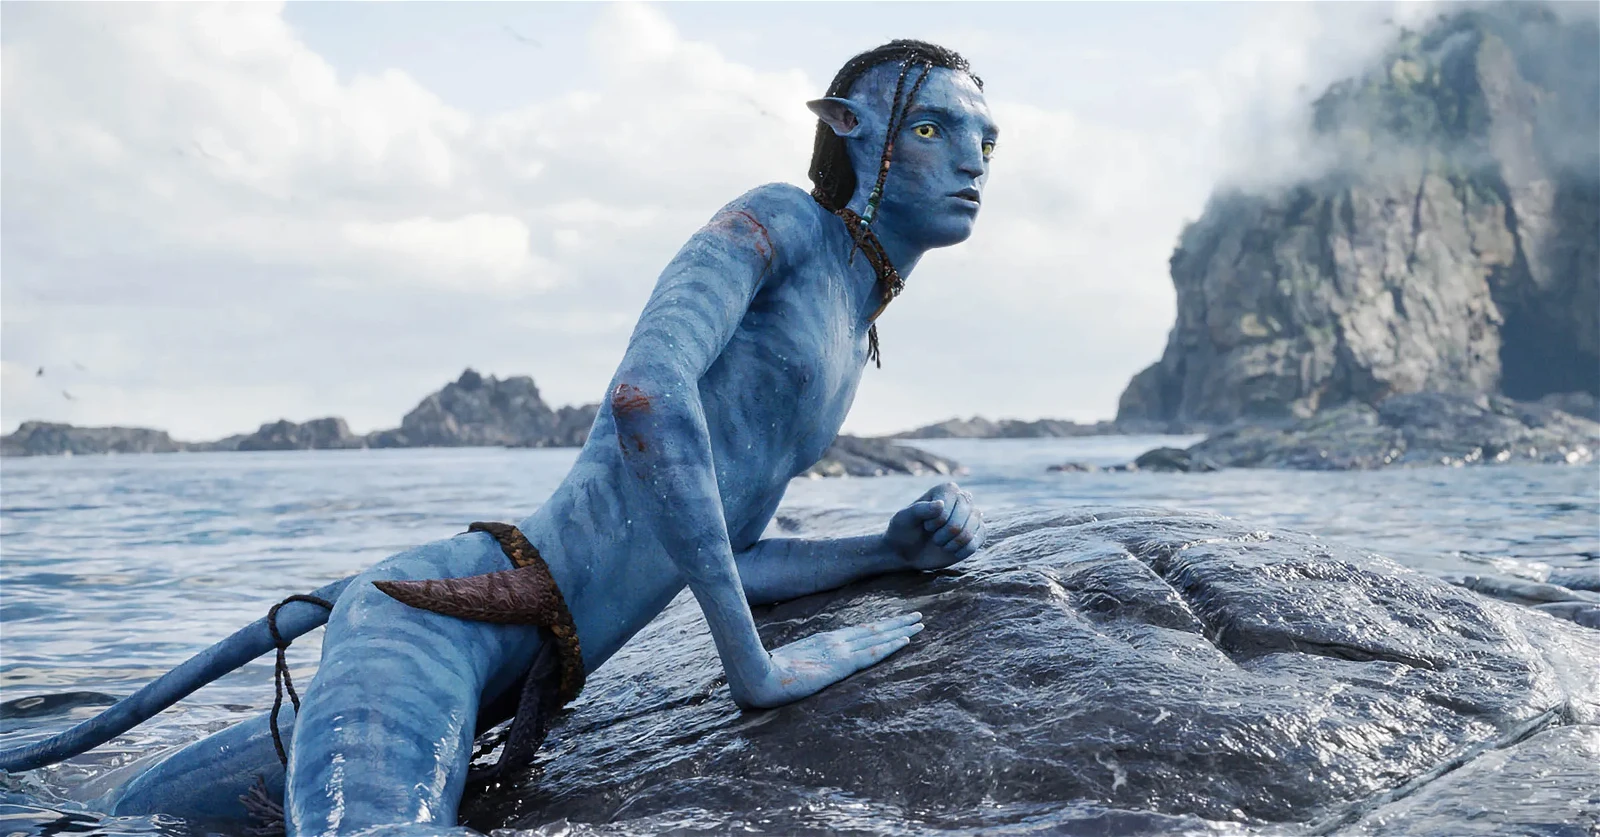 A still from James Cameron's Avatar: The Way of Water (2022).